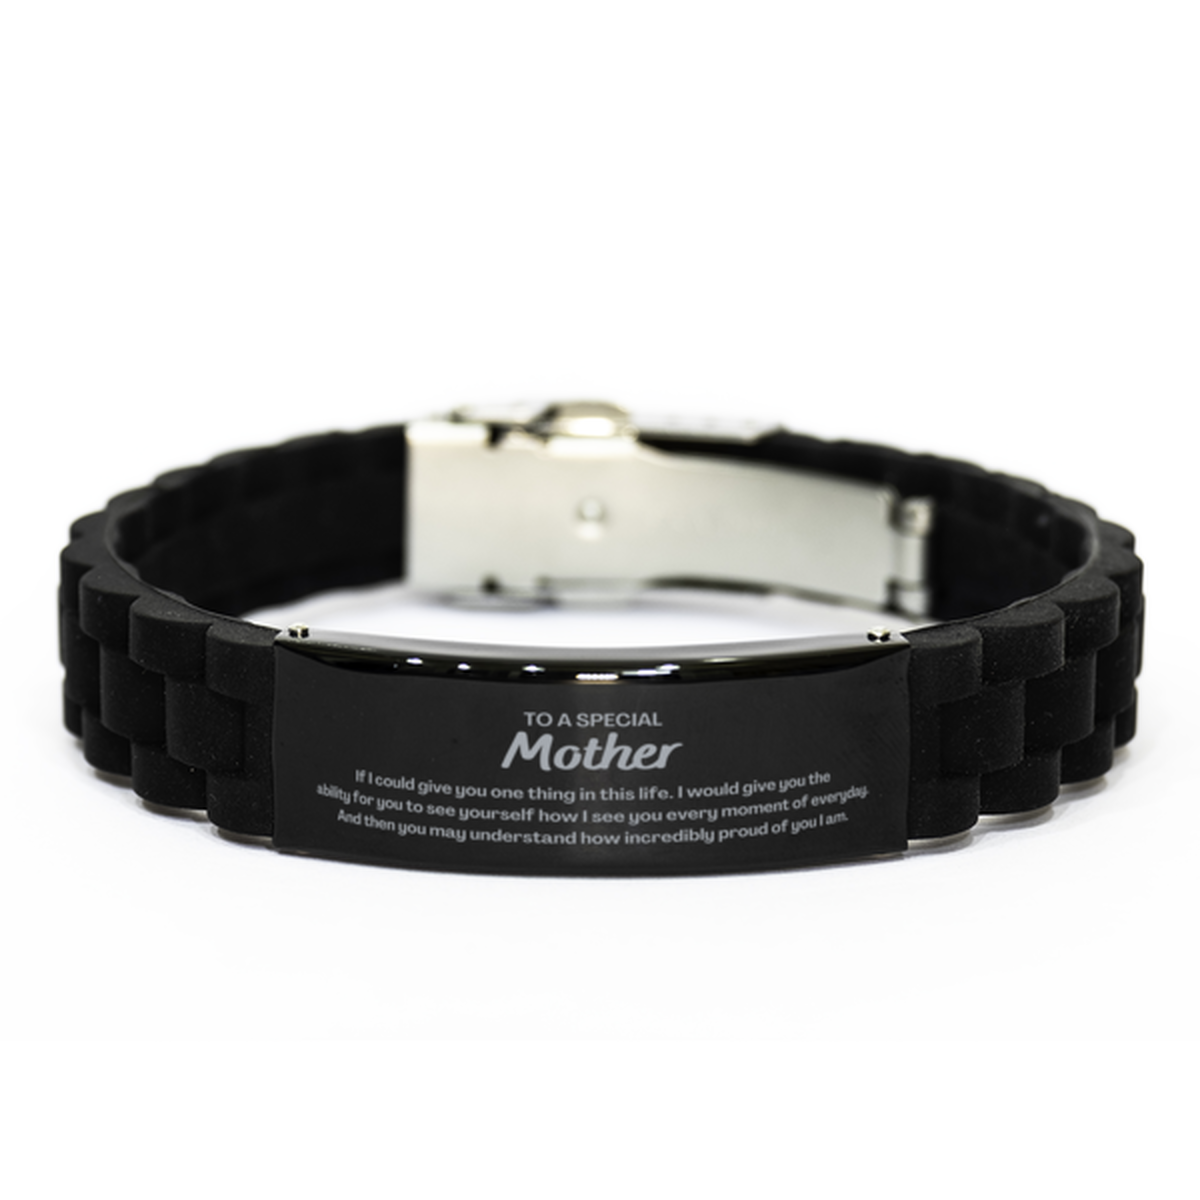 To My Mother Black Glidelock Clasp Bracelet, Gifts For Mother Engraved, Inspirational Gifts for Christmas Birthday, Epic Gifts for Mother To A Special Mother how incredibly proud of you I am